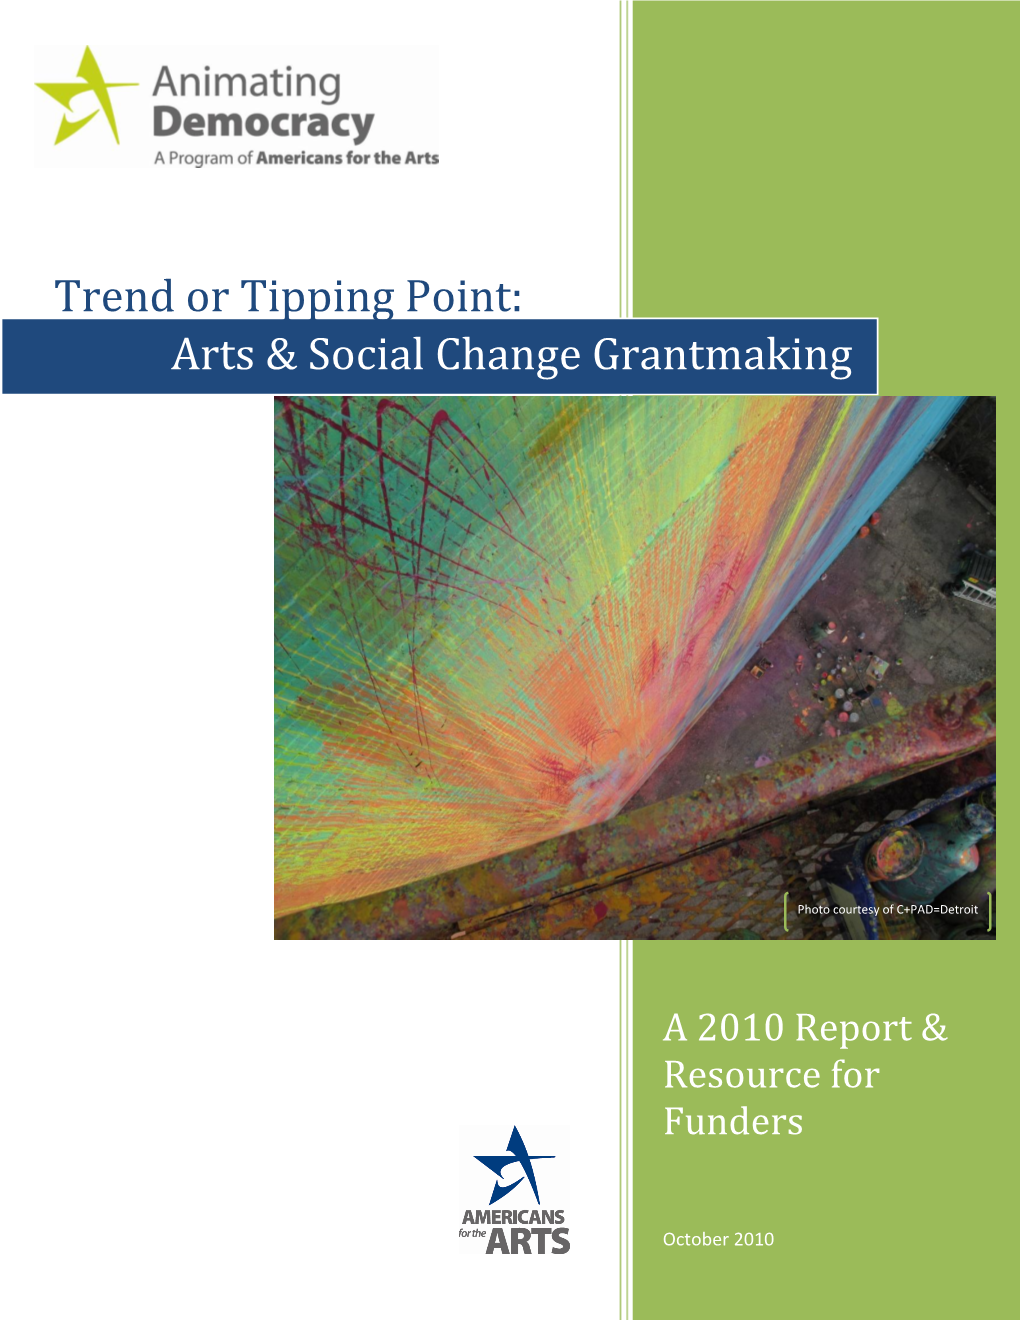 Trend Or Tipping Point: Arts & Social Change Grantmaking